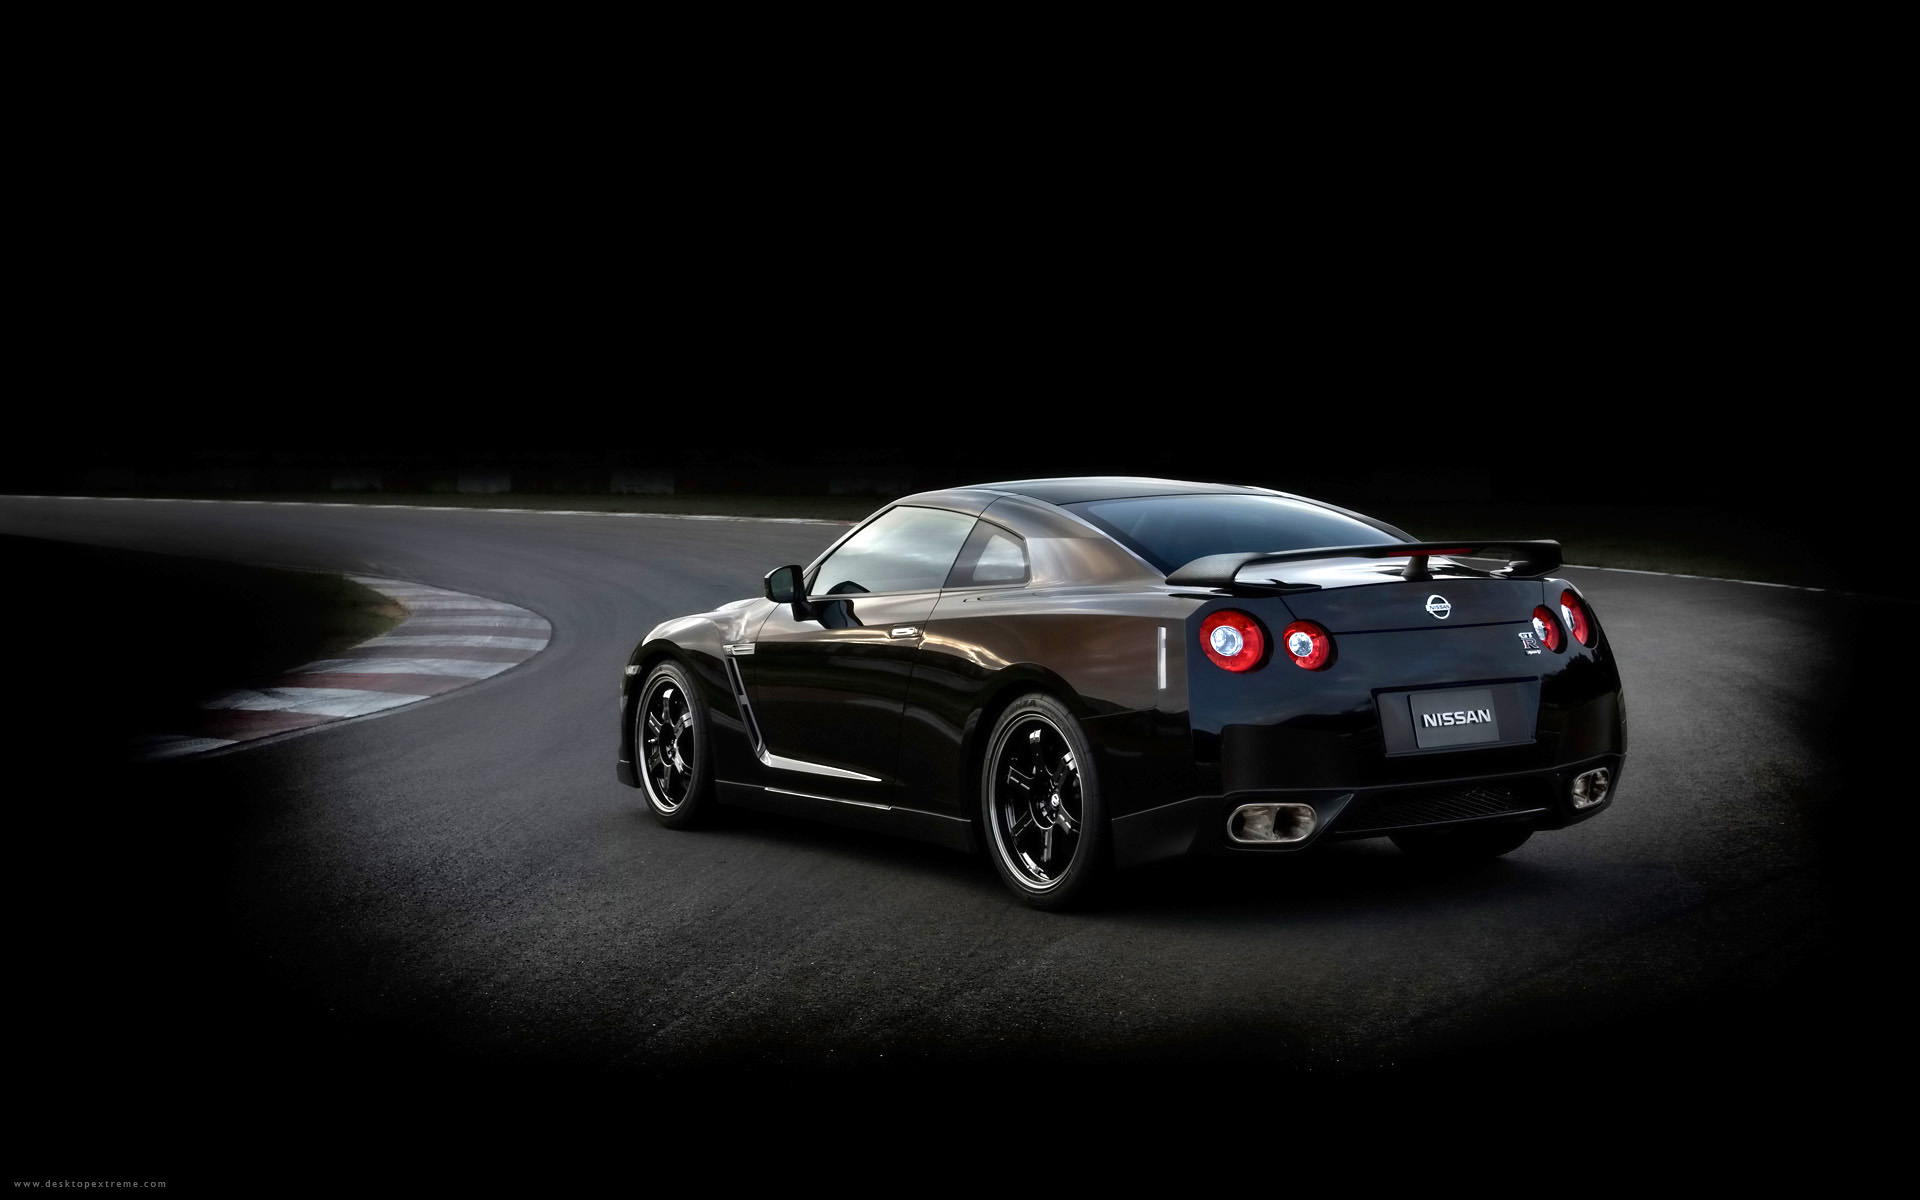 Nissan gtr wallpapers hd desktop backgrounds images and pictures